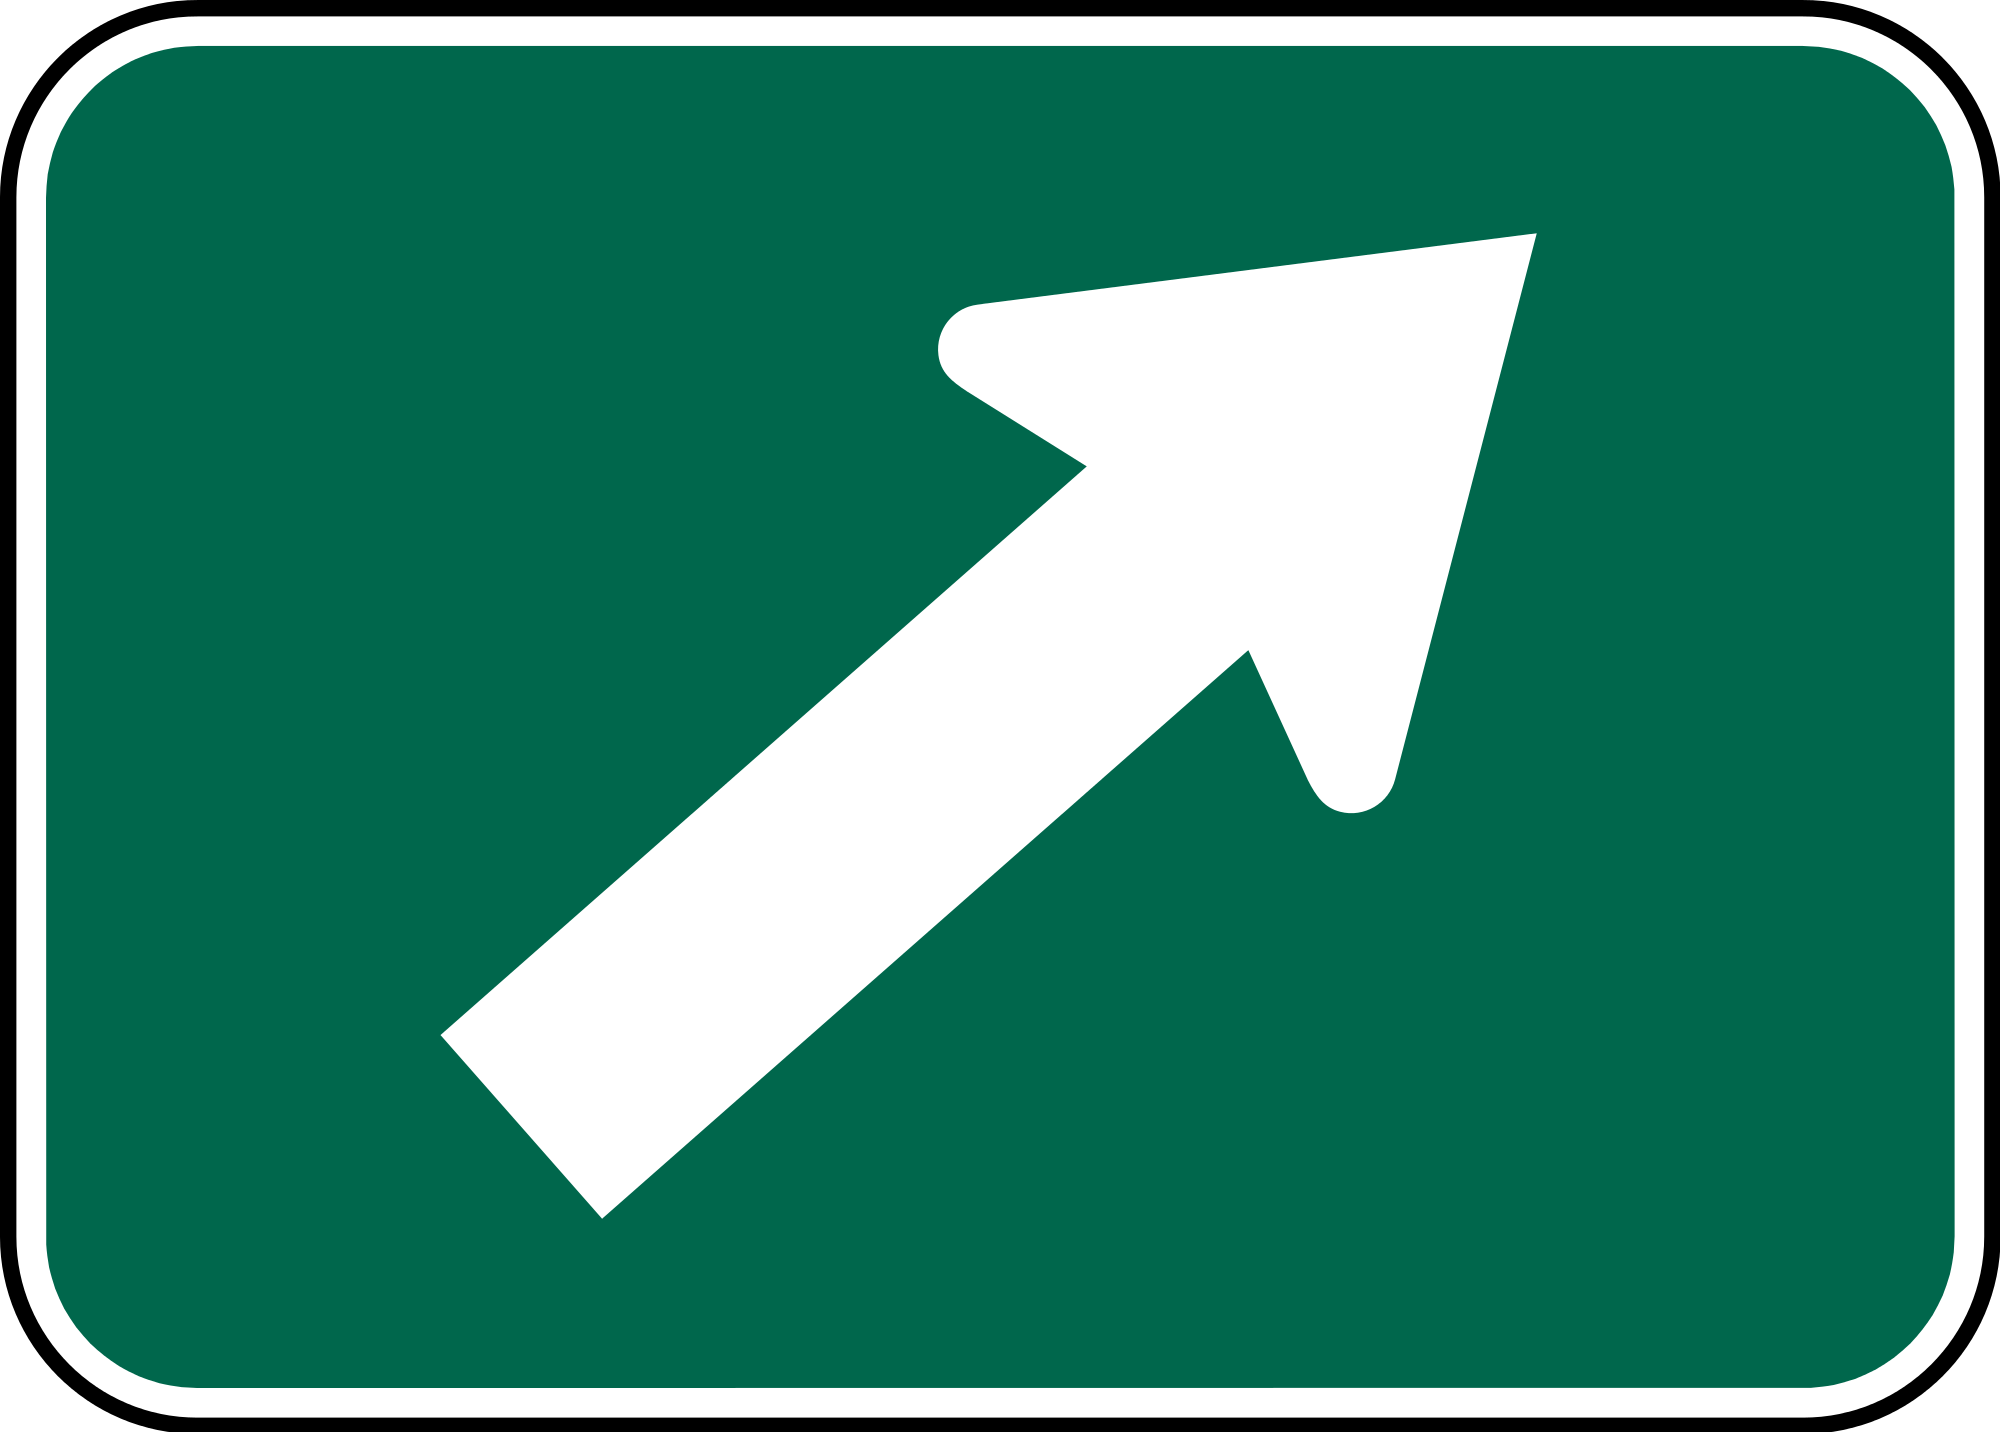 Знак 4g. Arrow pointing diagonally right. Green arrow Road sign. Arrow left and right PNG без фона. Arrow sign down.